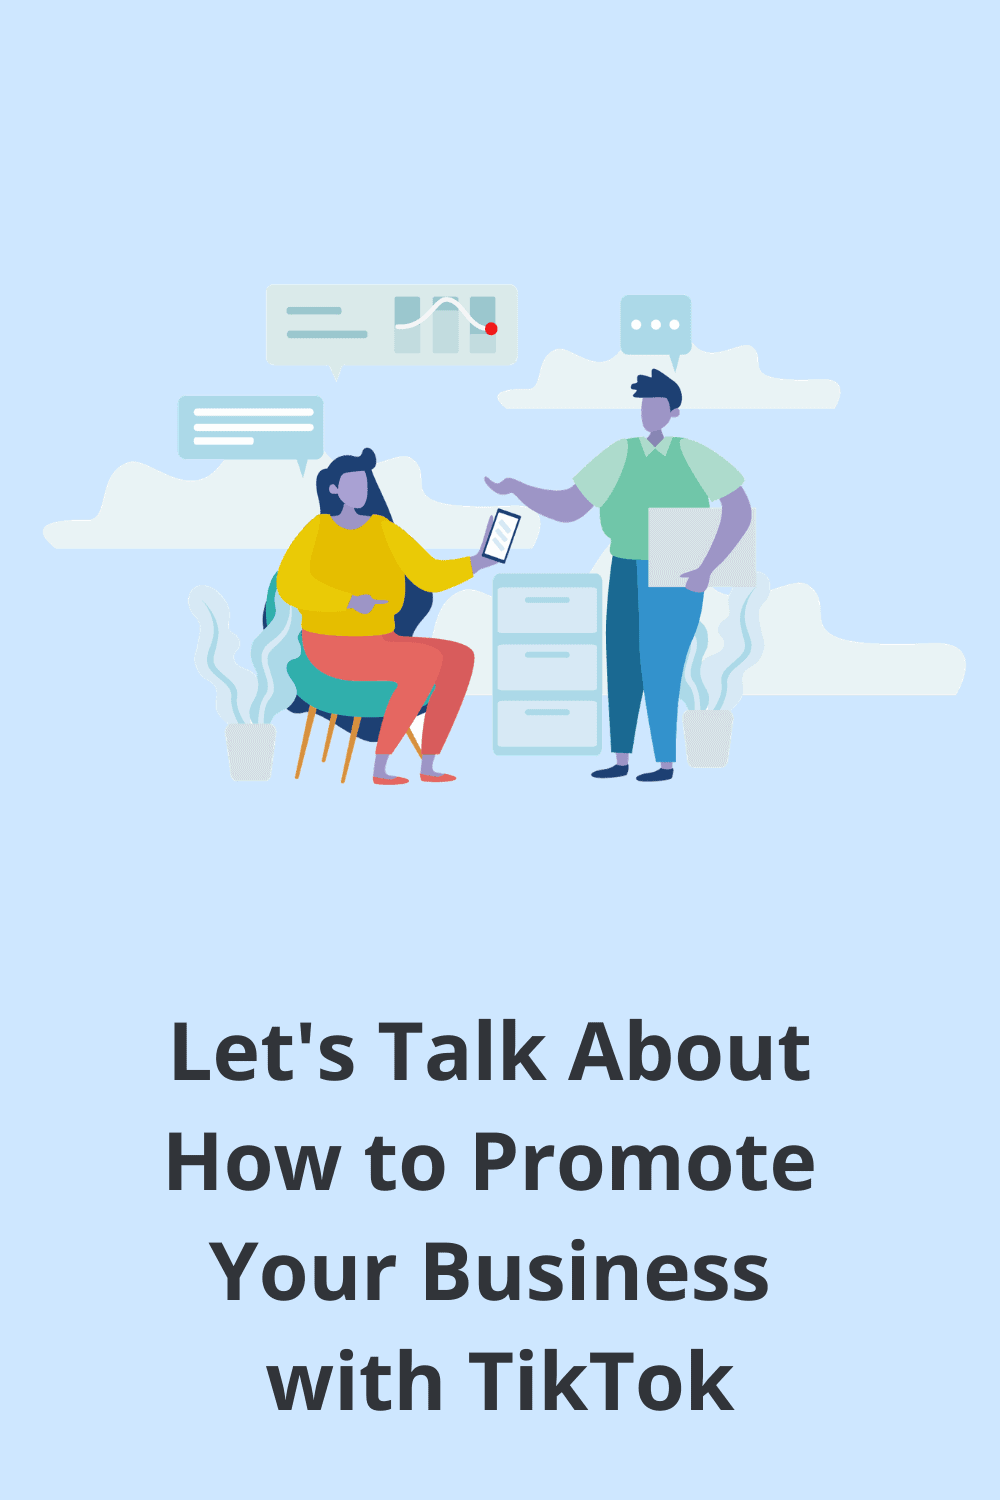 What we hope you’ll take away from this is that making TikToks is easy and it can help your business connect with a whole new audience. via @scopedesign